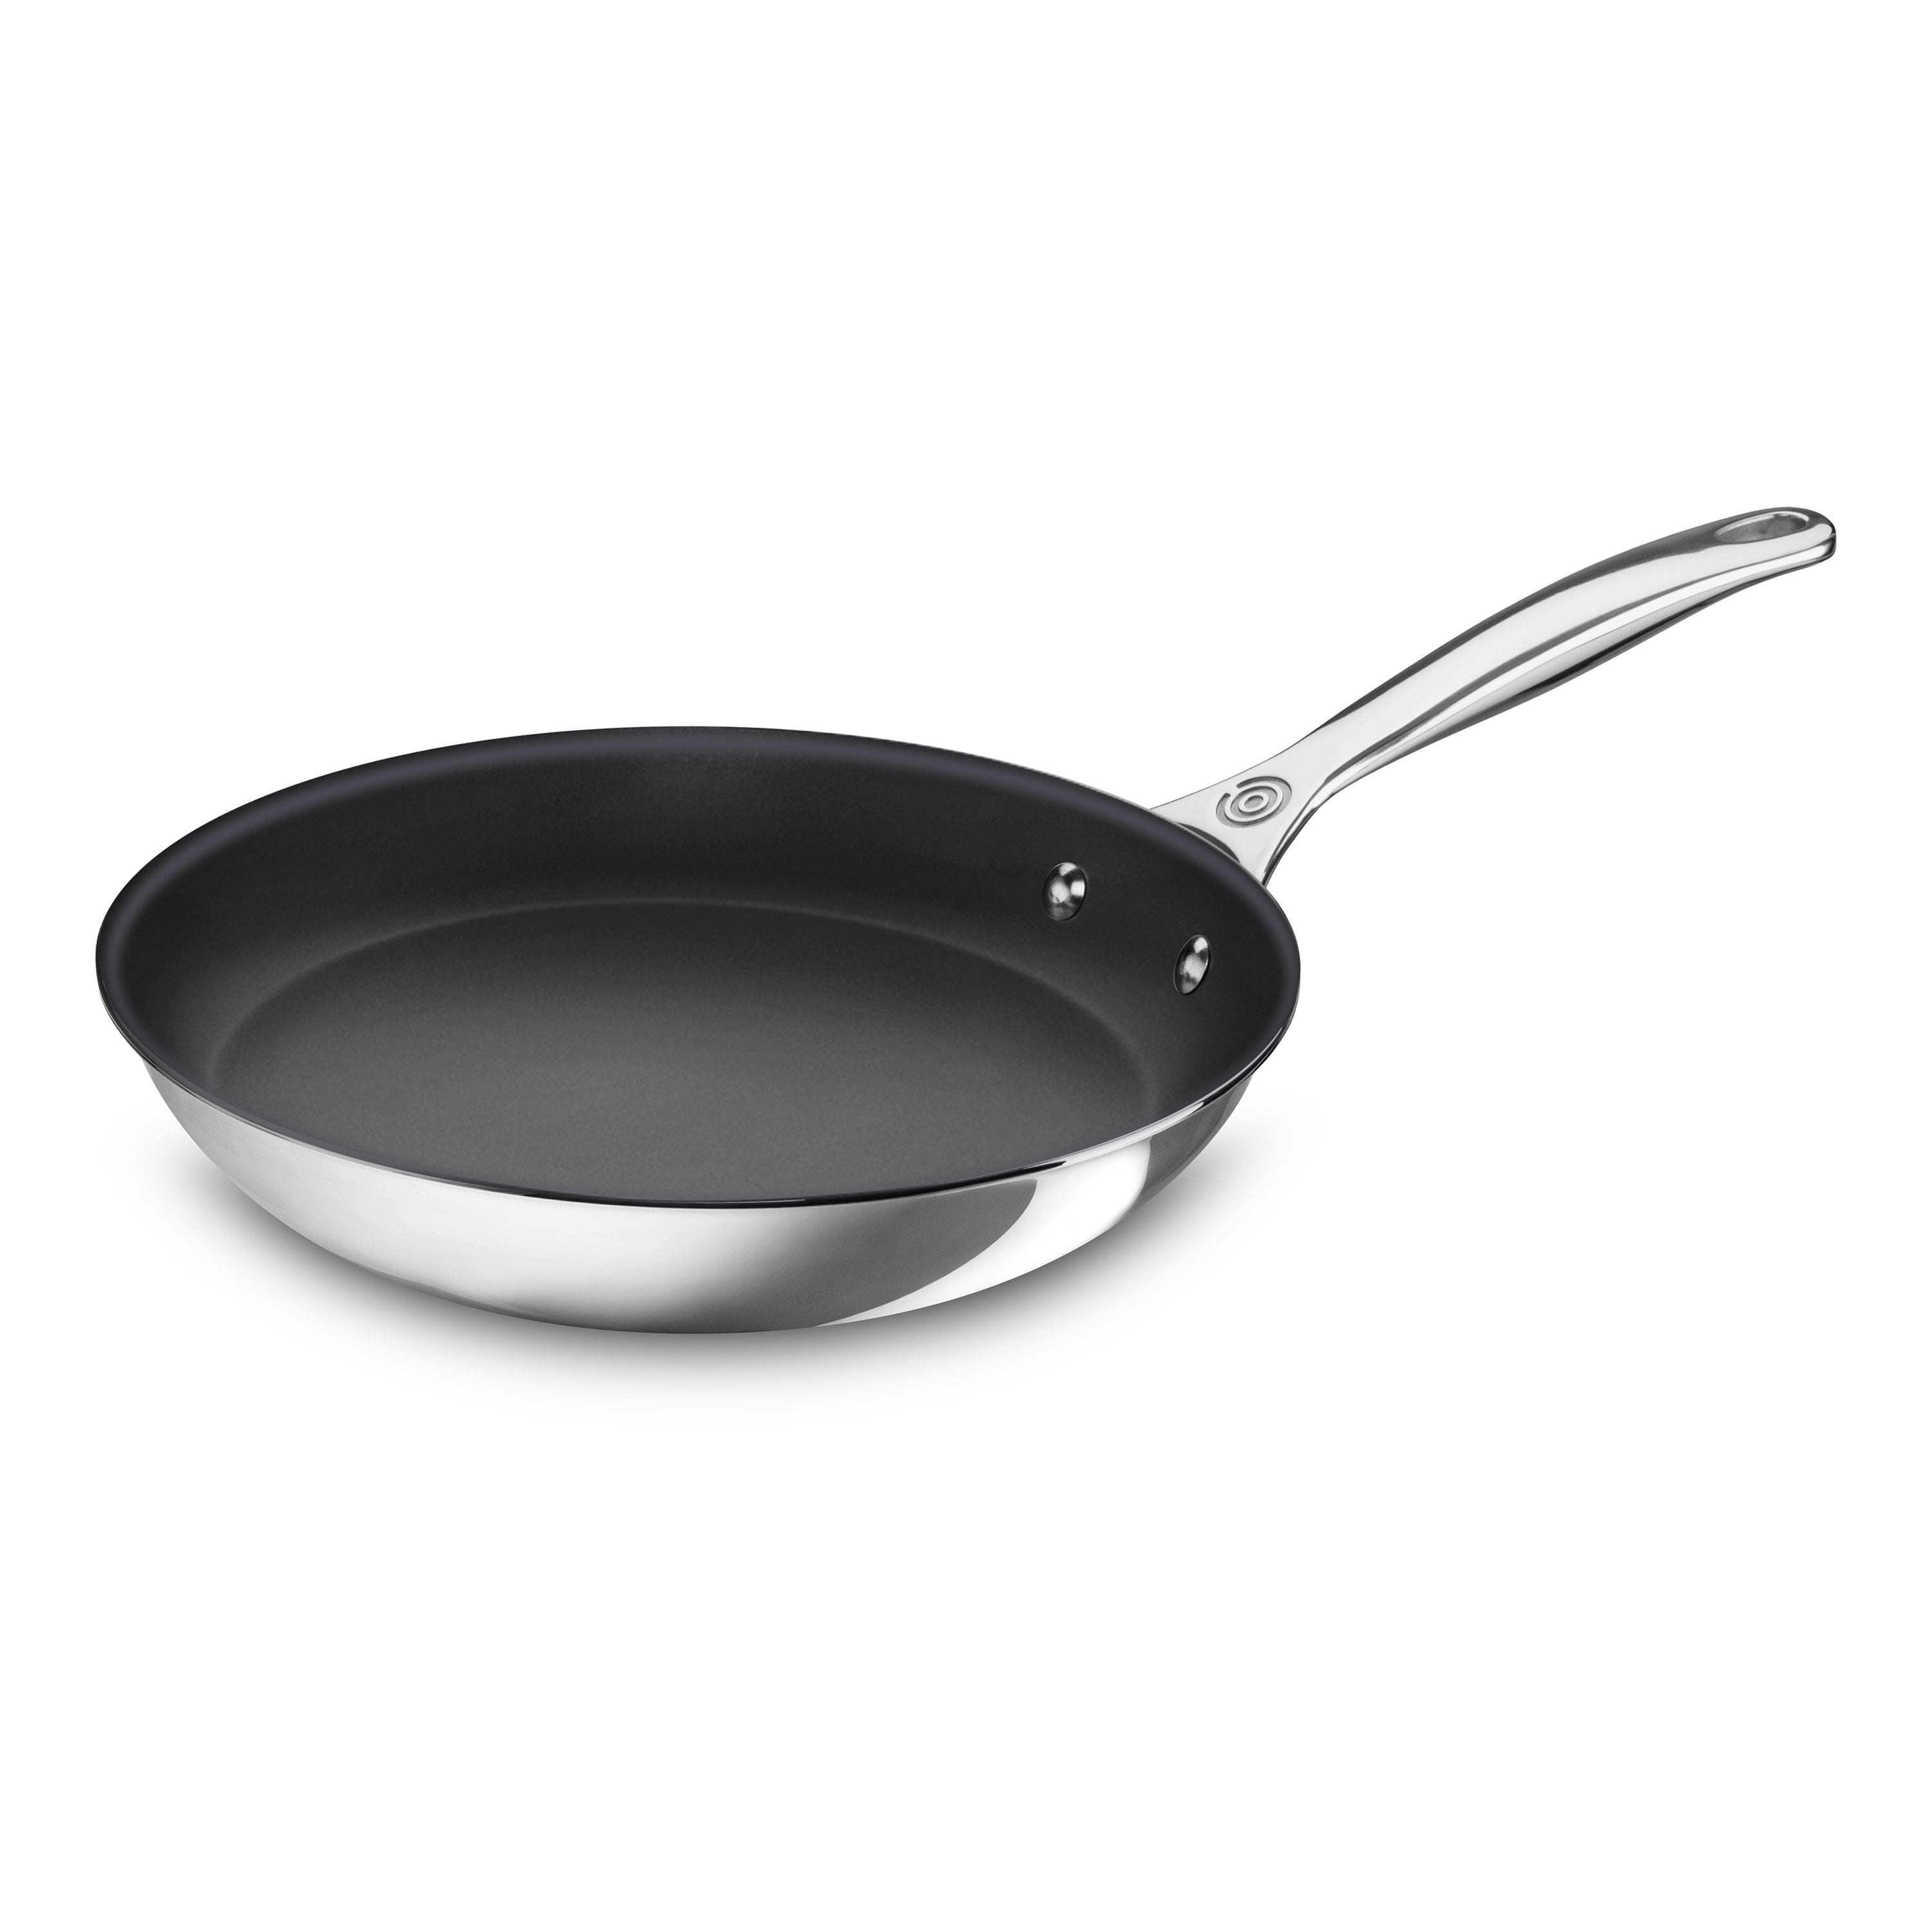 Le Creuset 10 Inch Stainless Steel Fry Pan - Winestuff